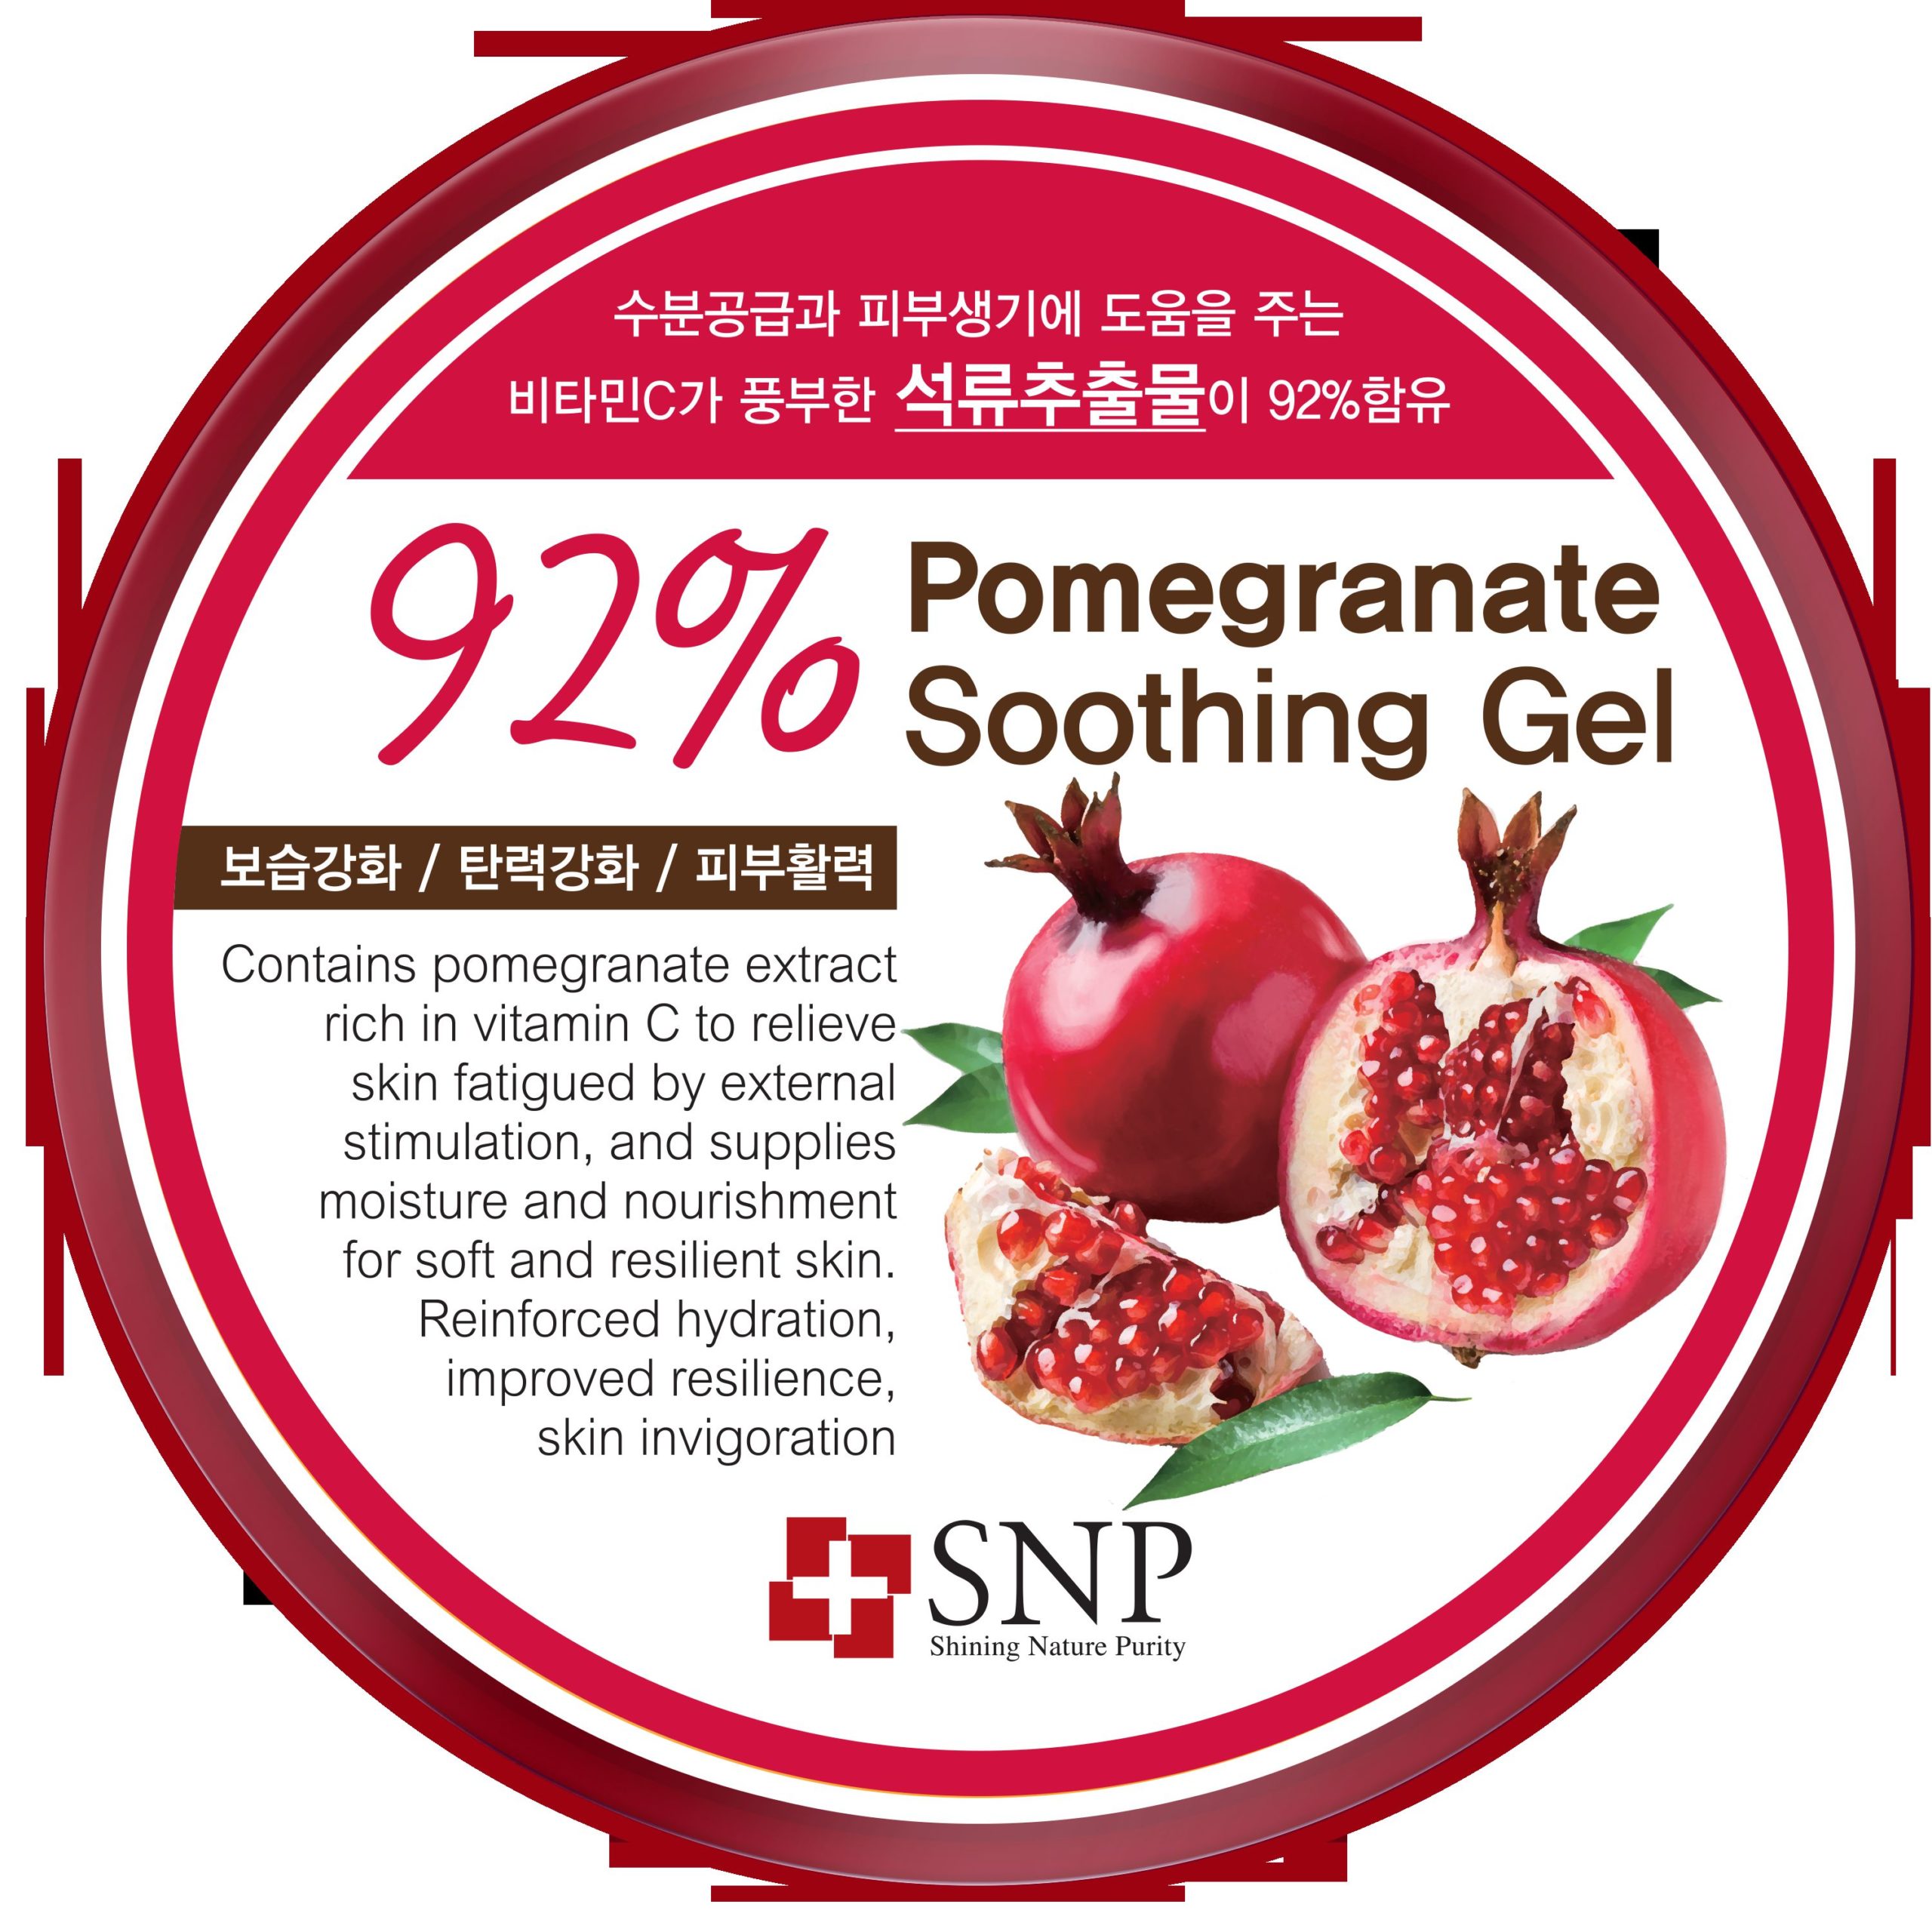 POMEGRANATE 92% SOOTHING GEL